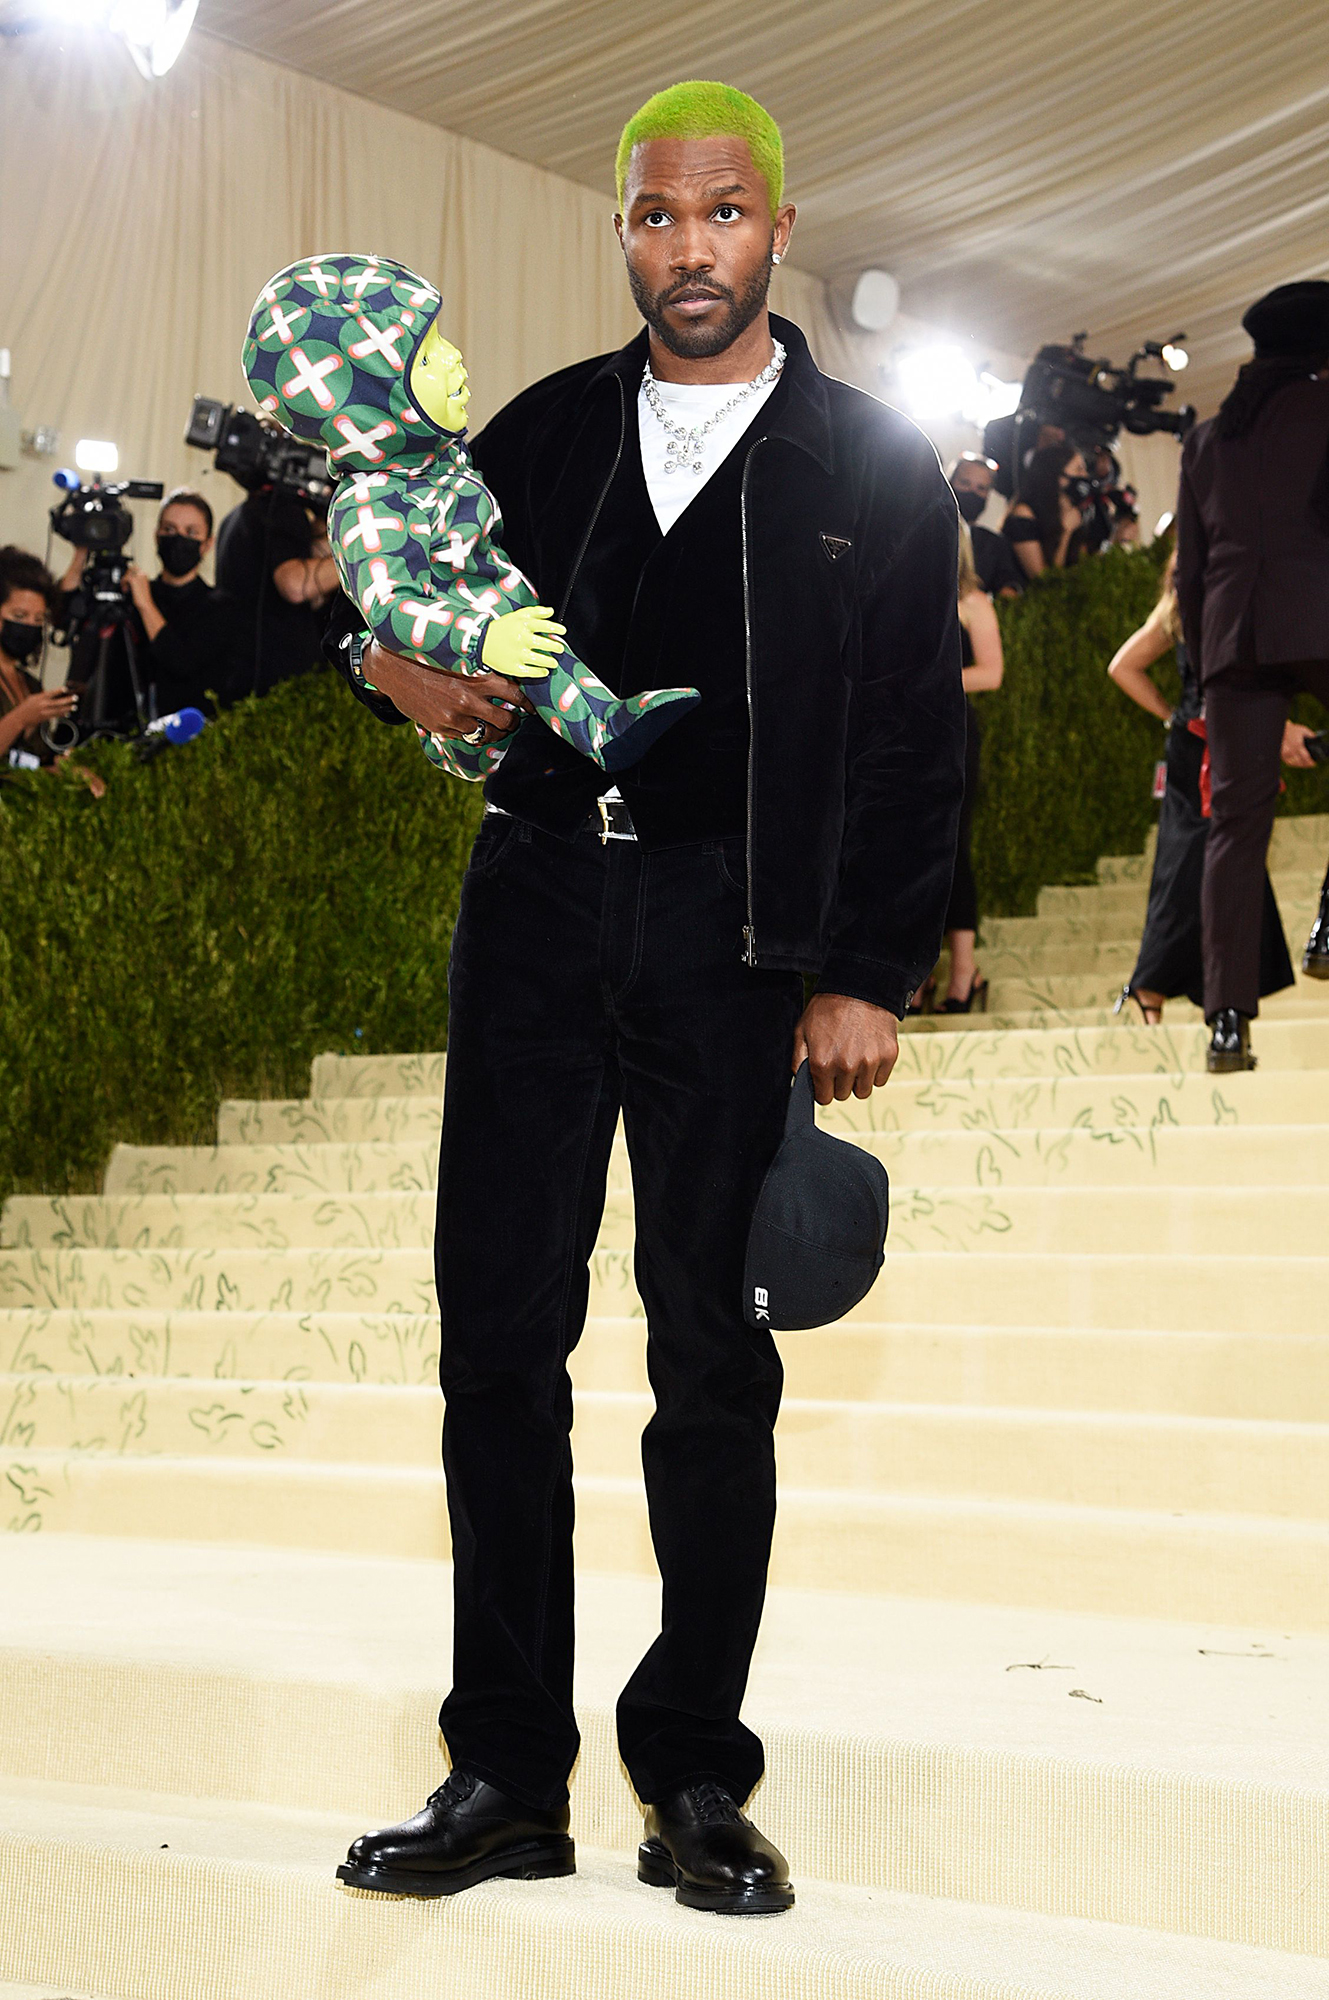 Met Gala 2021: Hottest Men in Tuxedos, Suits and More